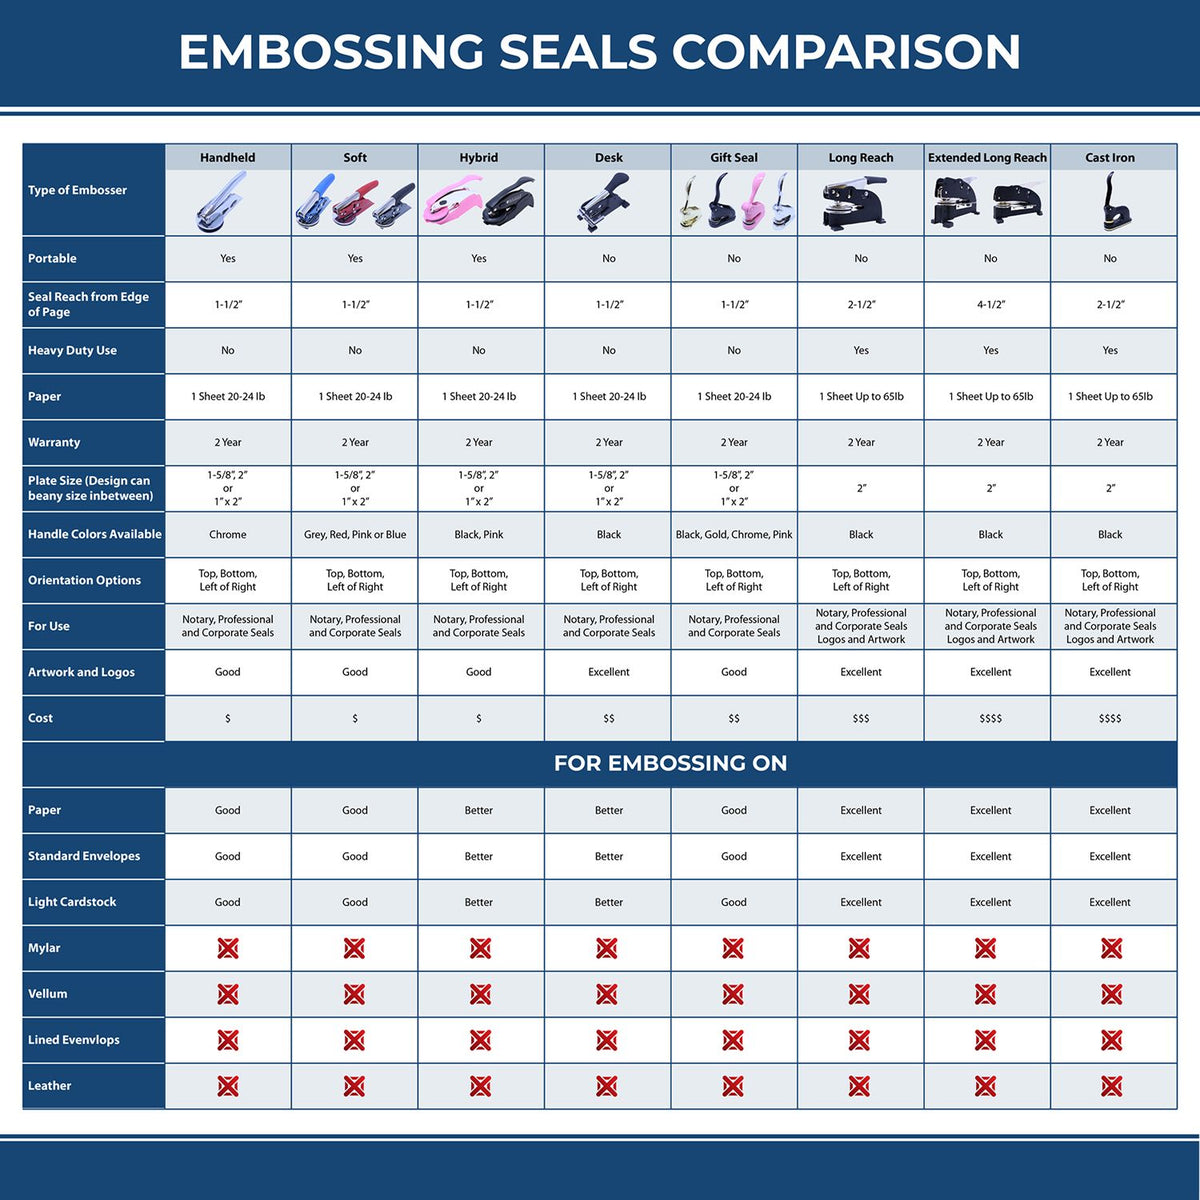 A comparison chart for the different types of mount models available for the New York Engineer Desk Seal.